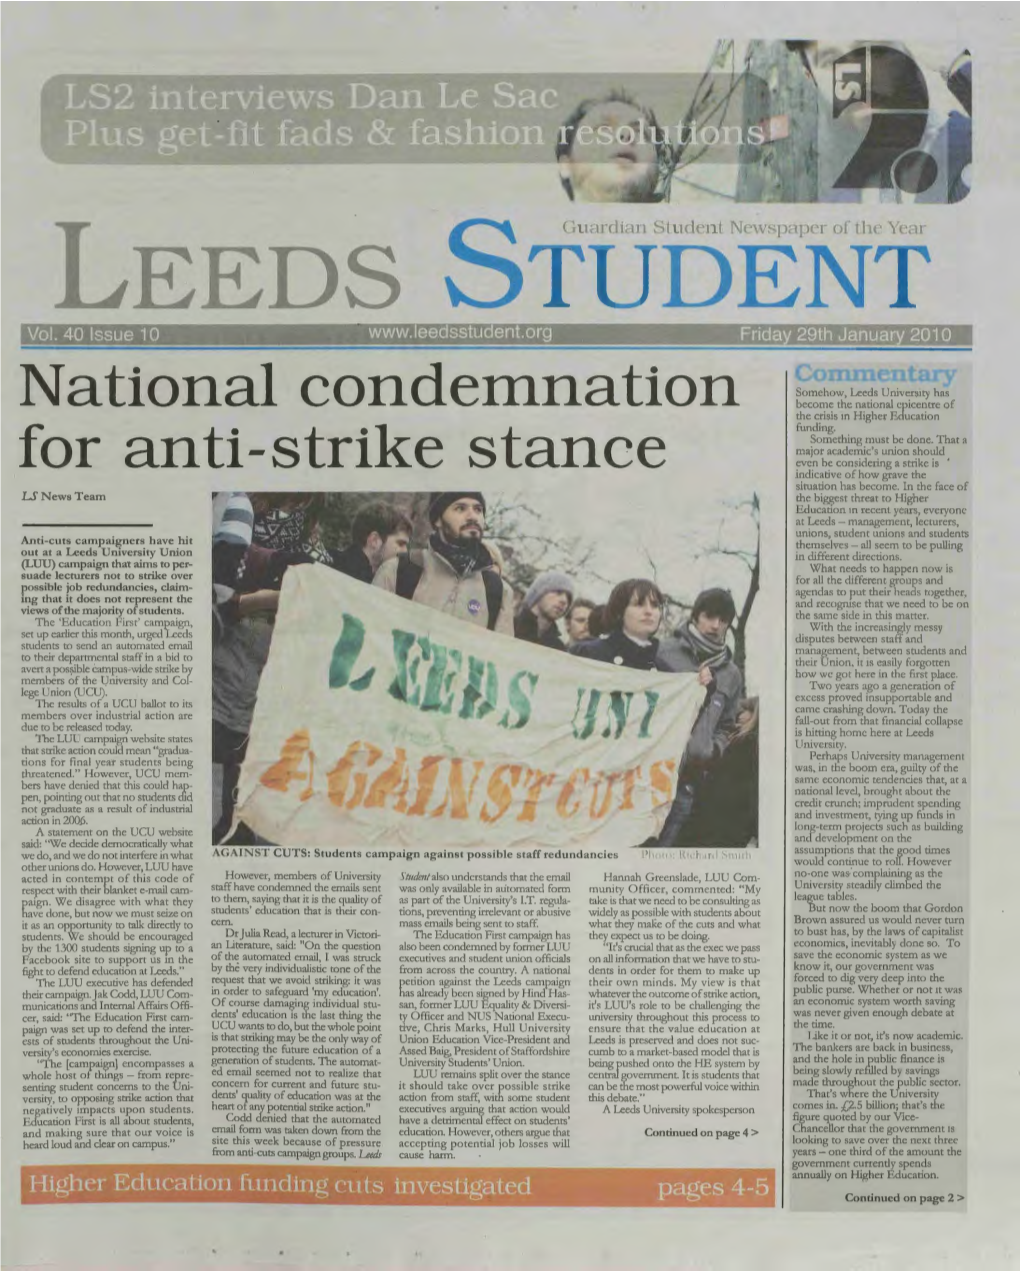 National Condemnation for Anti-Strike Stance